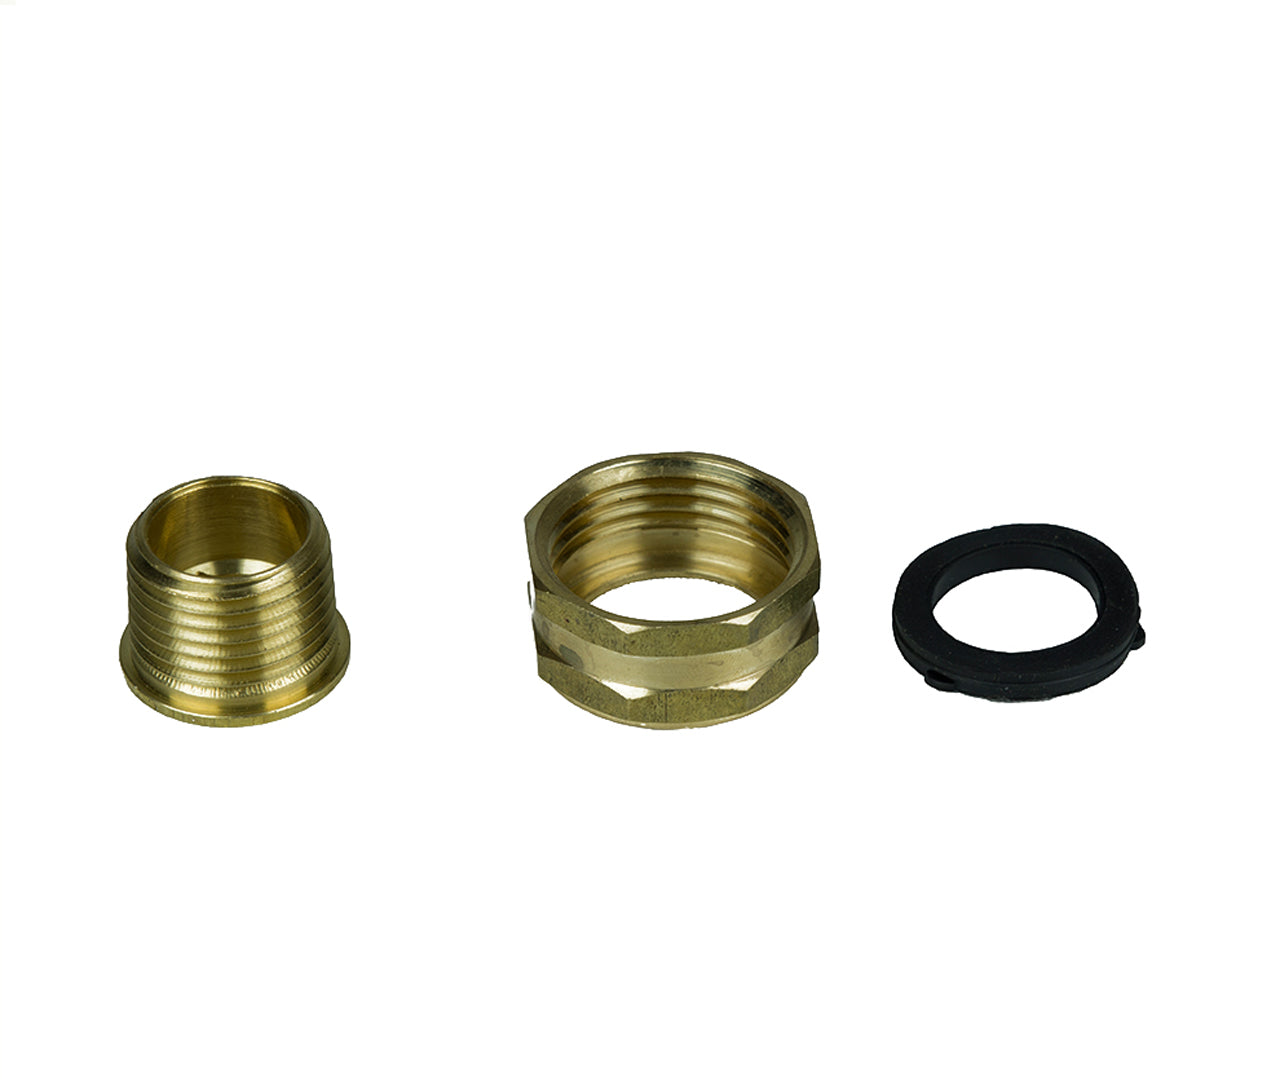 Replacement fittings for SR-360 & SRPB-360